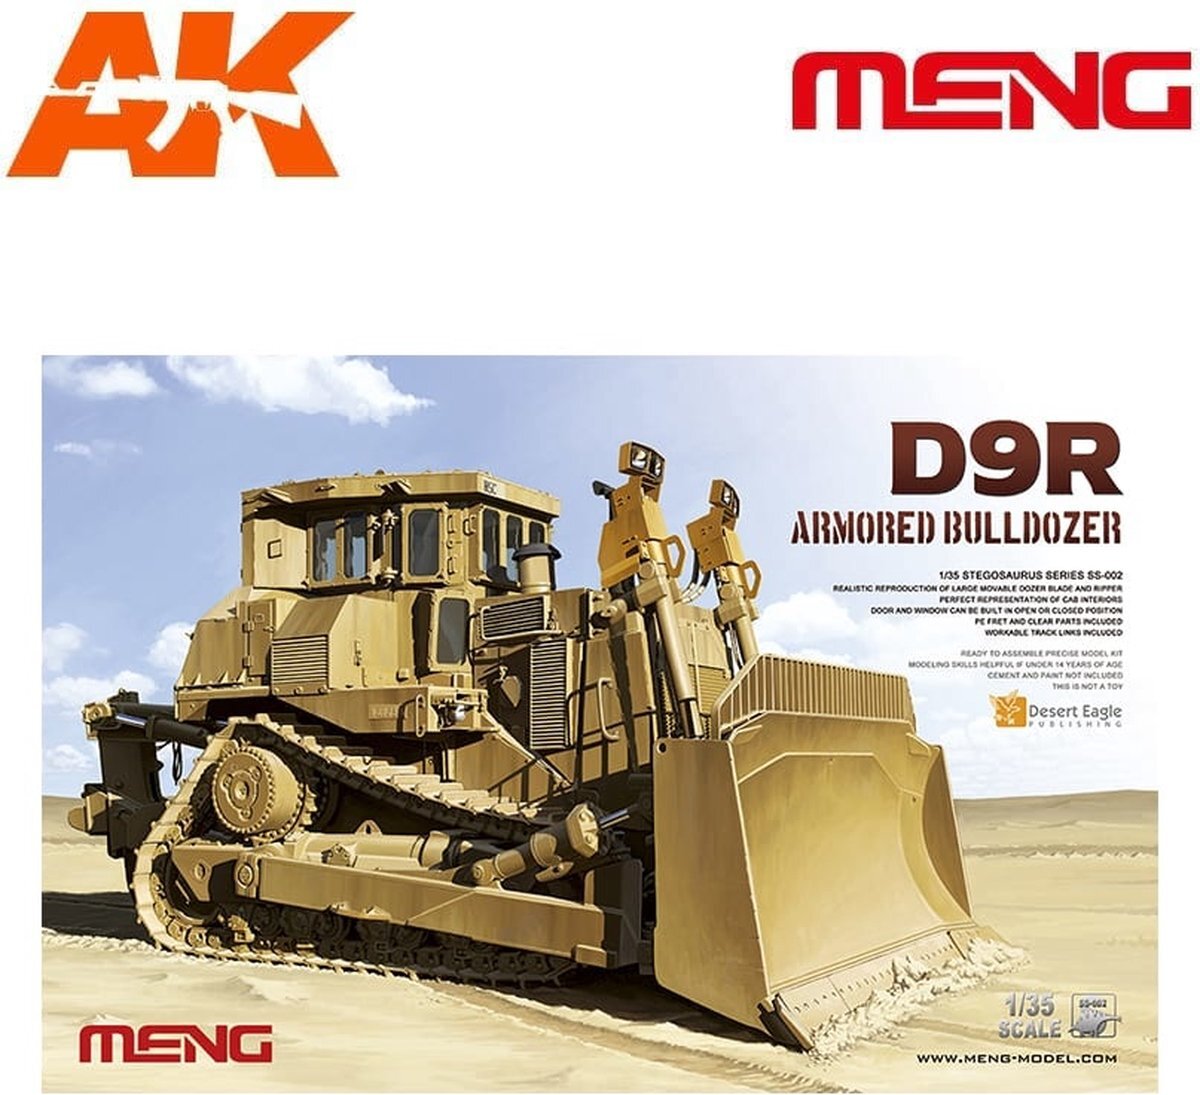 meng D9R Armored Bulldozer - Scale 1/35 - Meng Models - MM SS-002